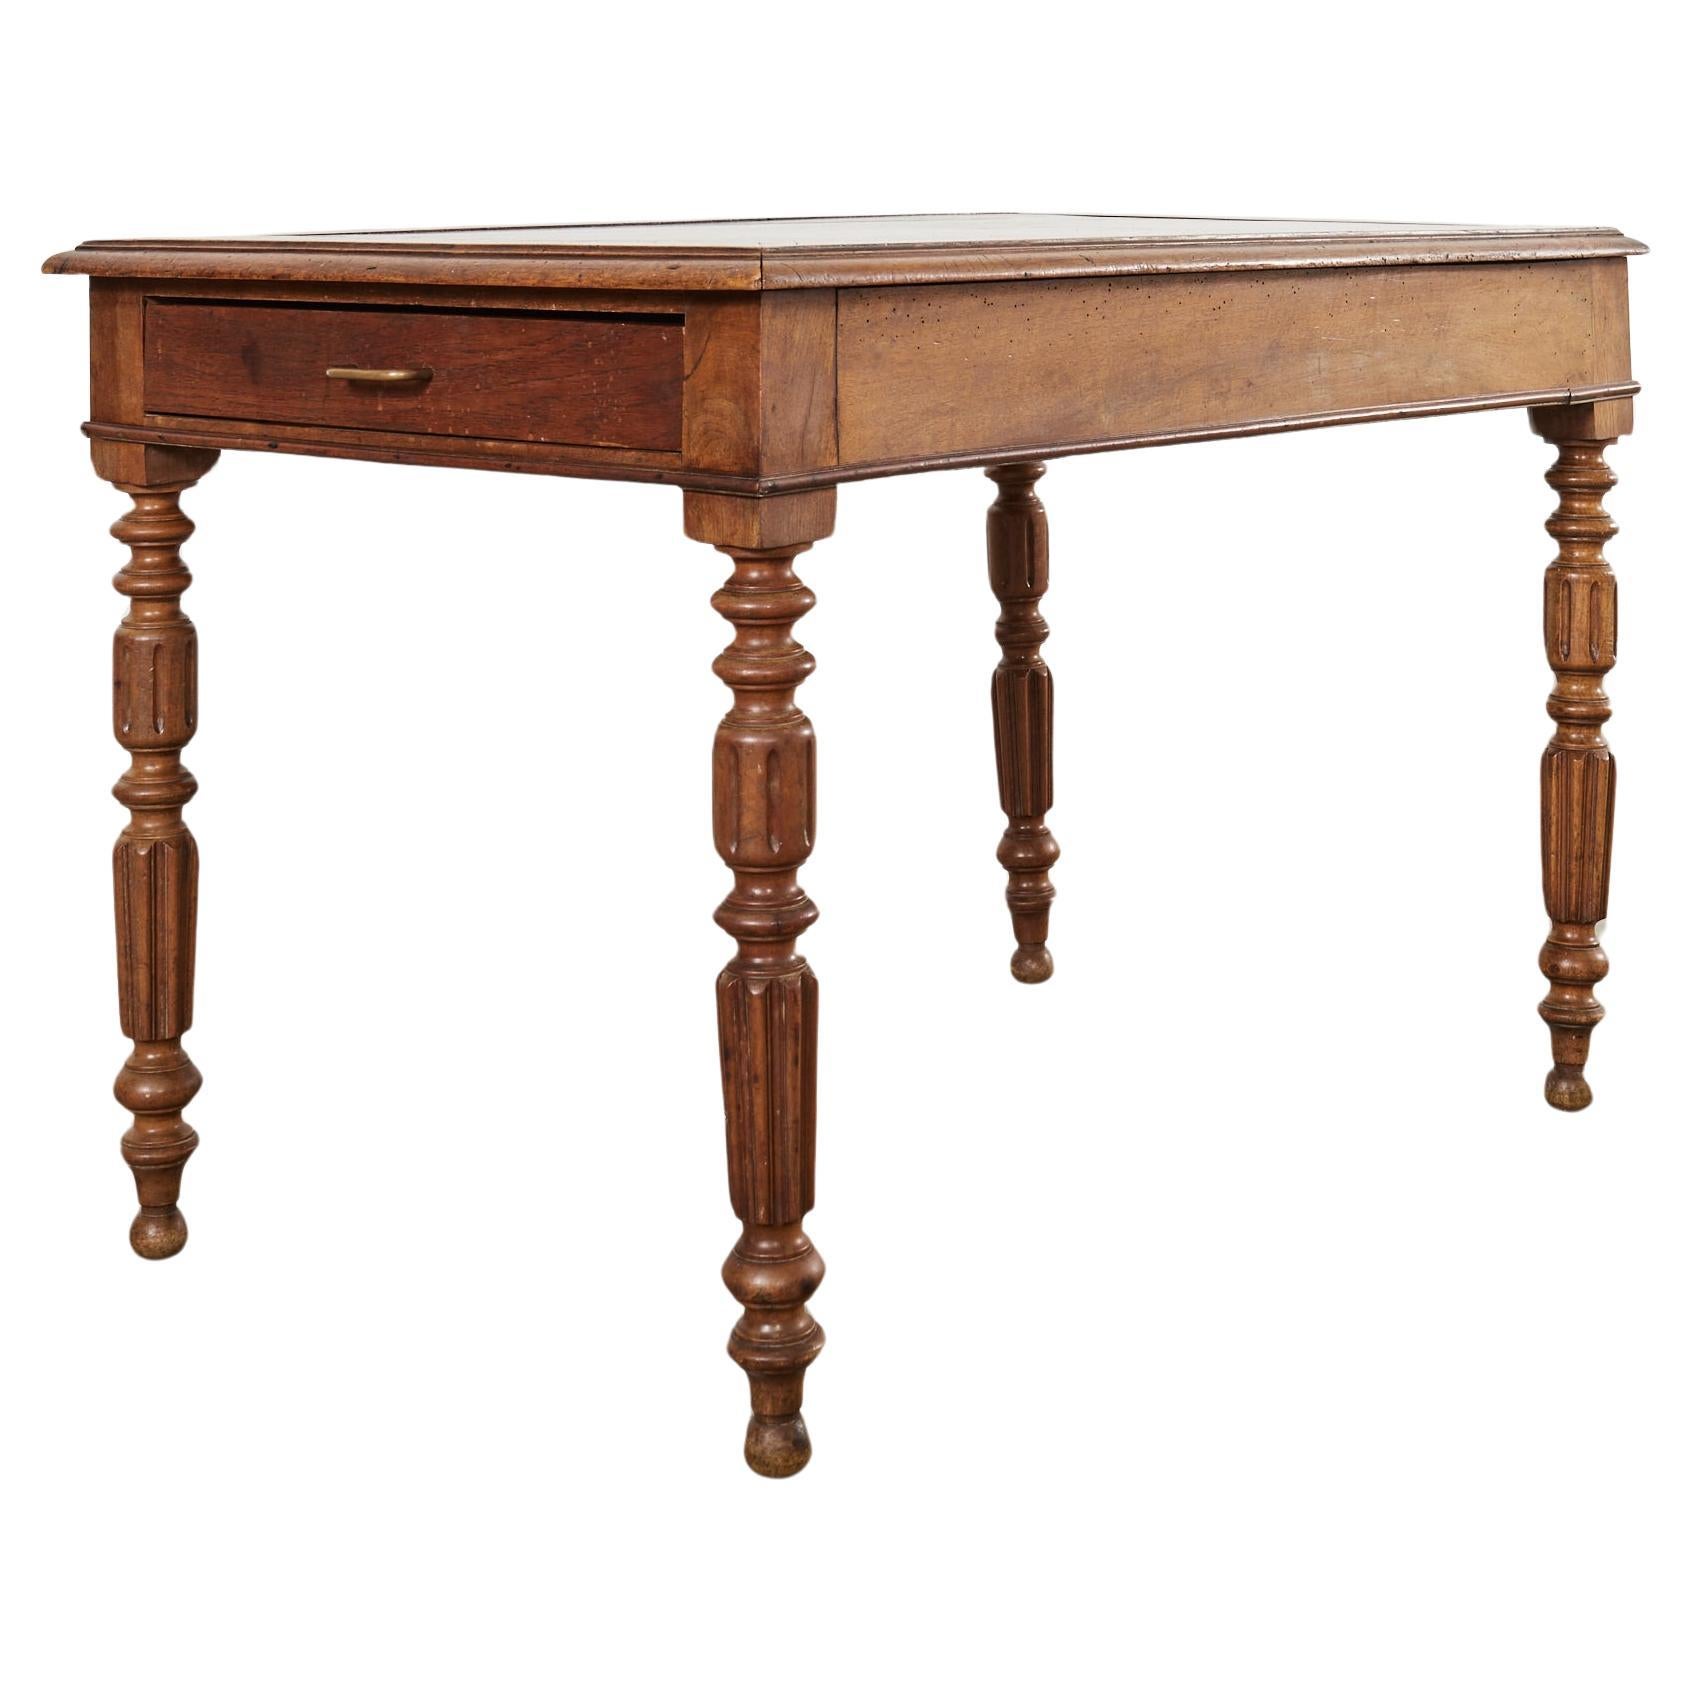 19th Century English William IV Fruitwood Writing Table or Desk For Sale